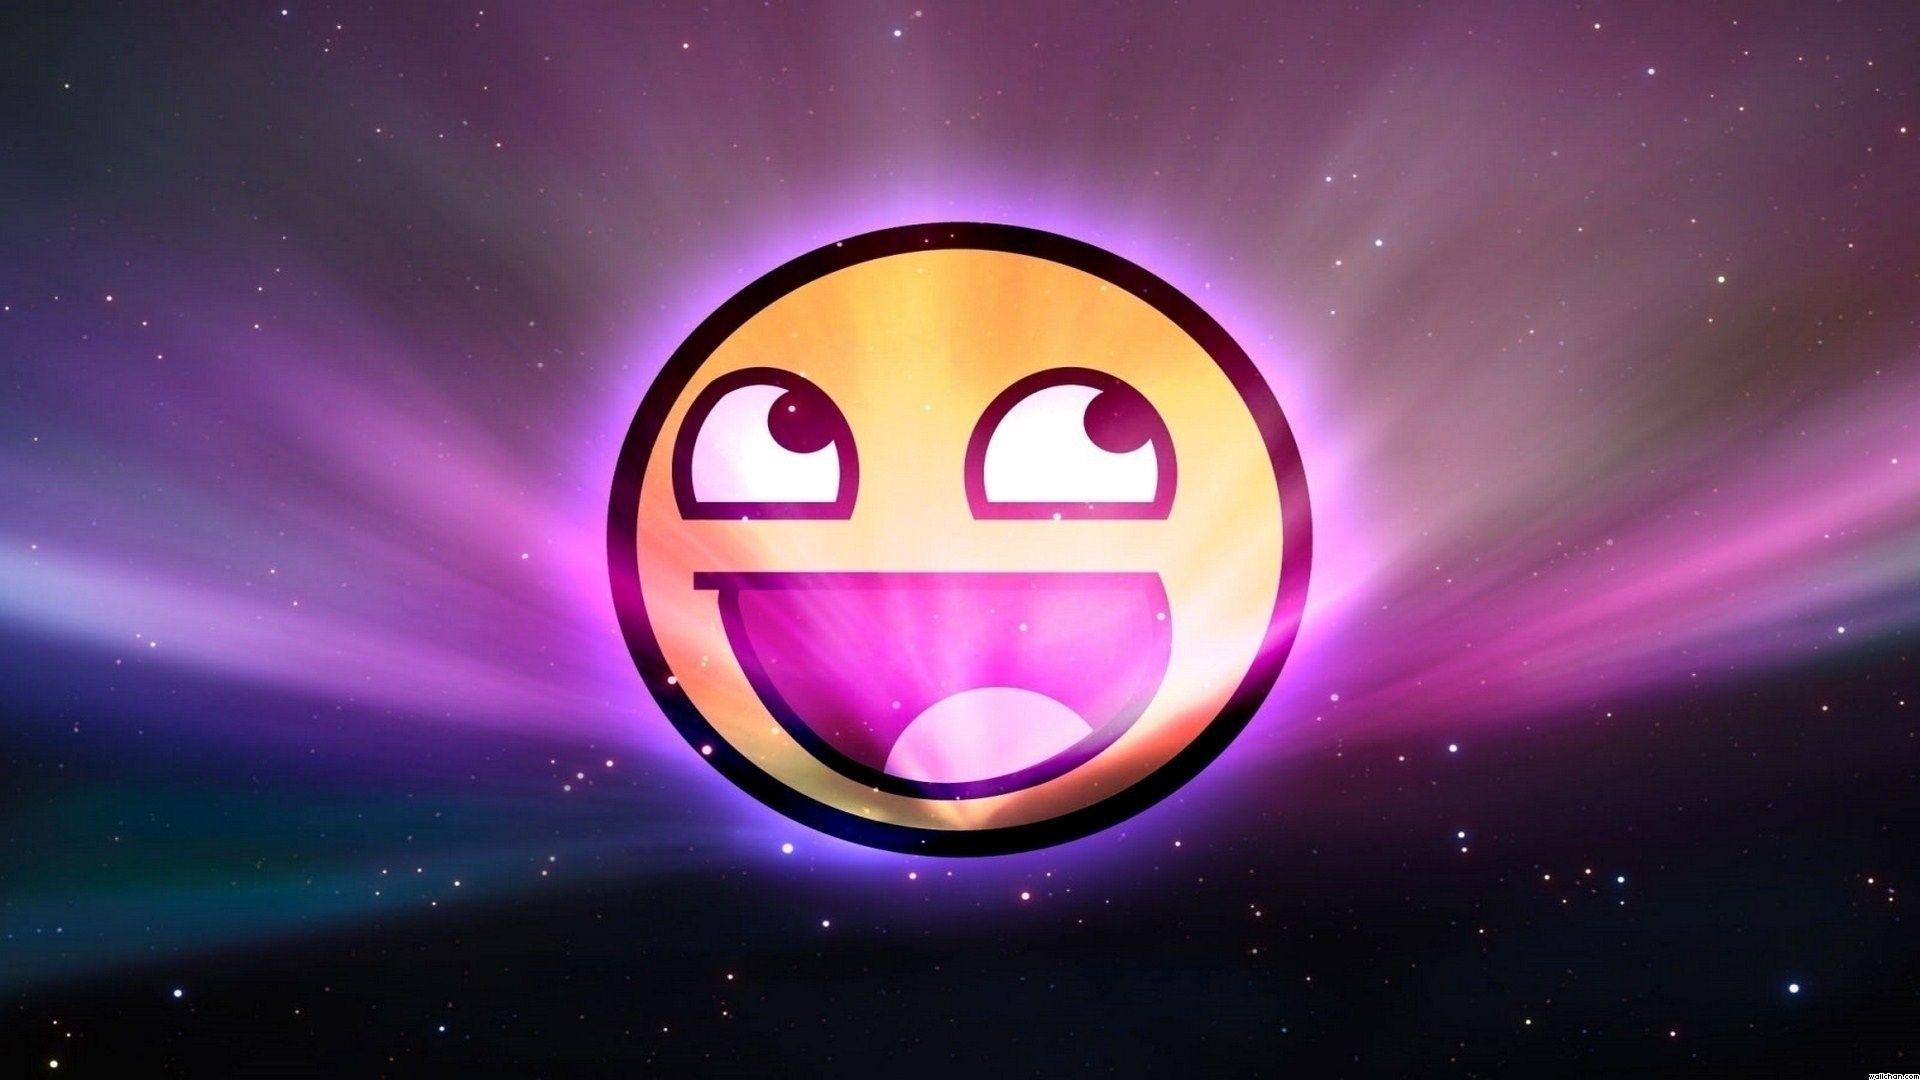 Epic Face Wallpapers Top Free Epic Face Backgrounds Wallpaperaccess - background galaxy epic cool roblox backgrounds